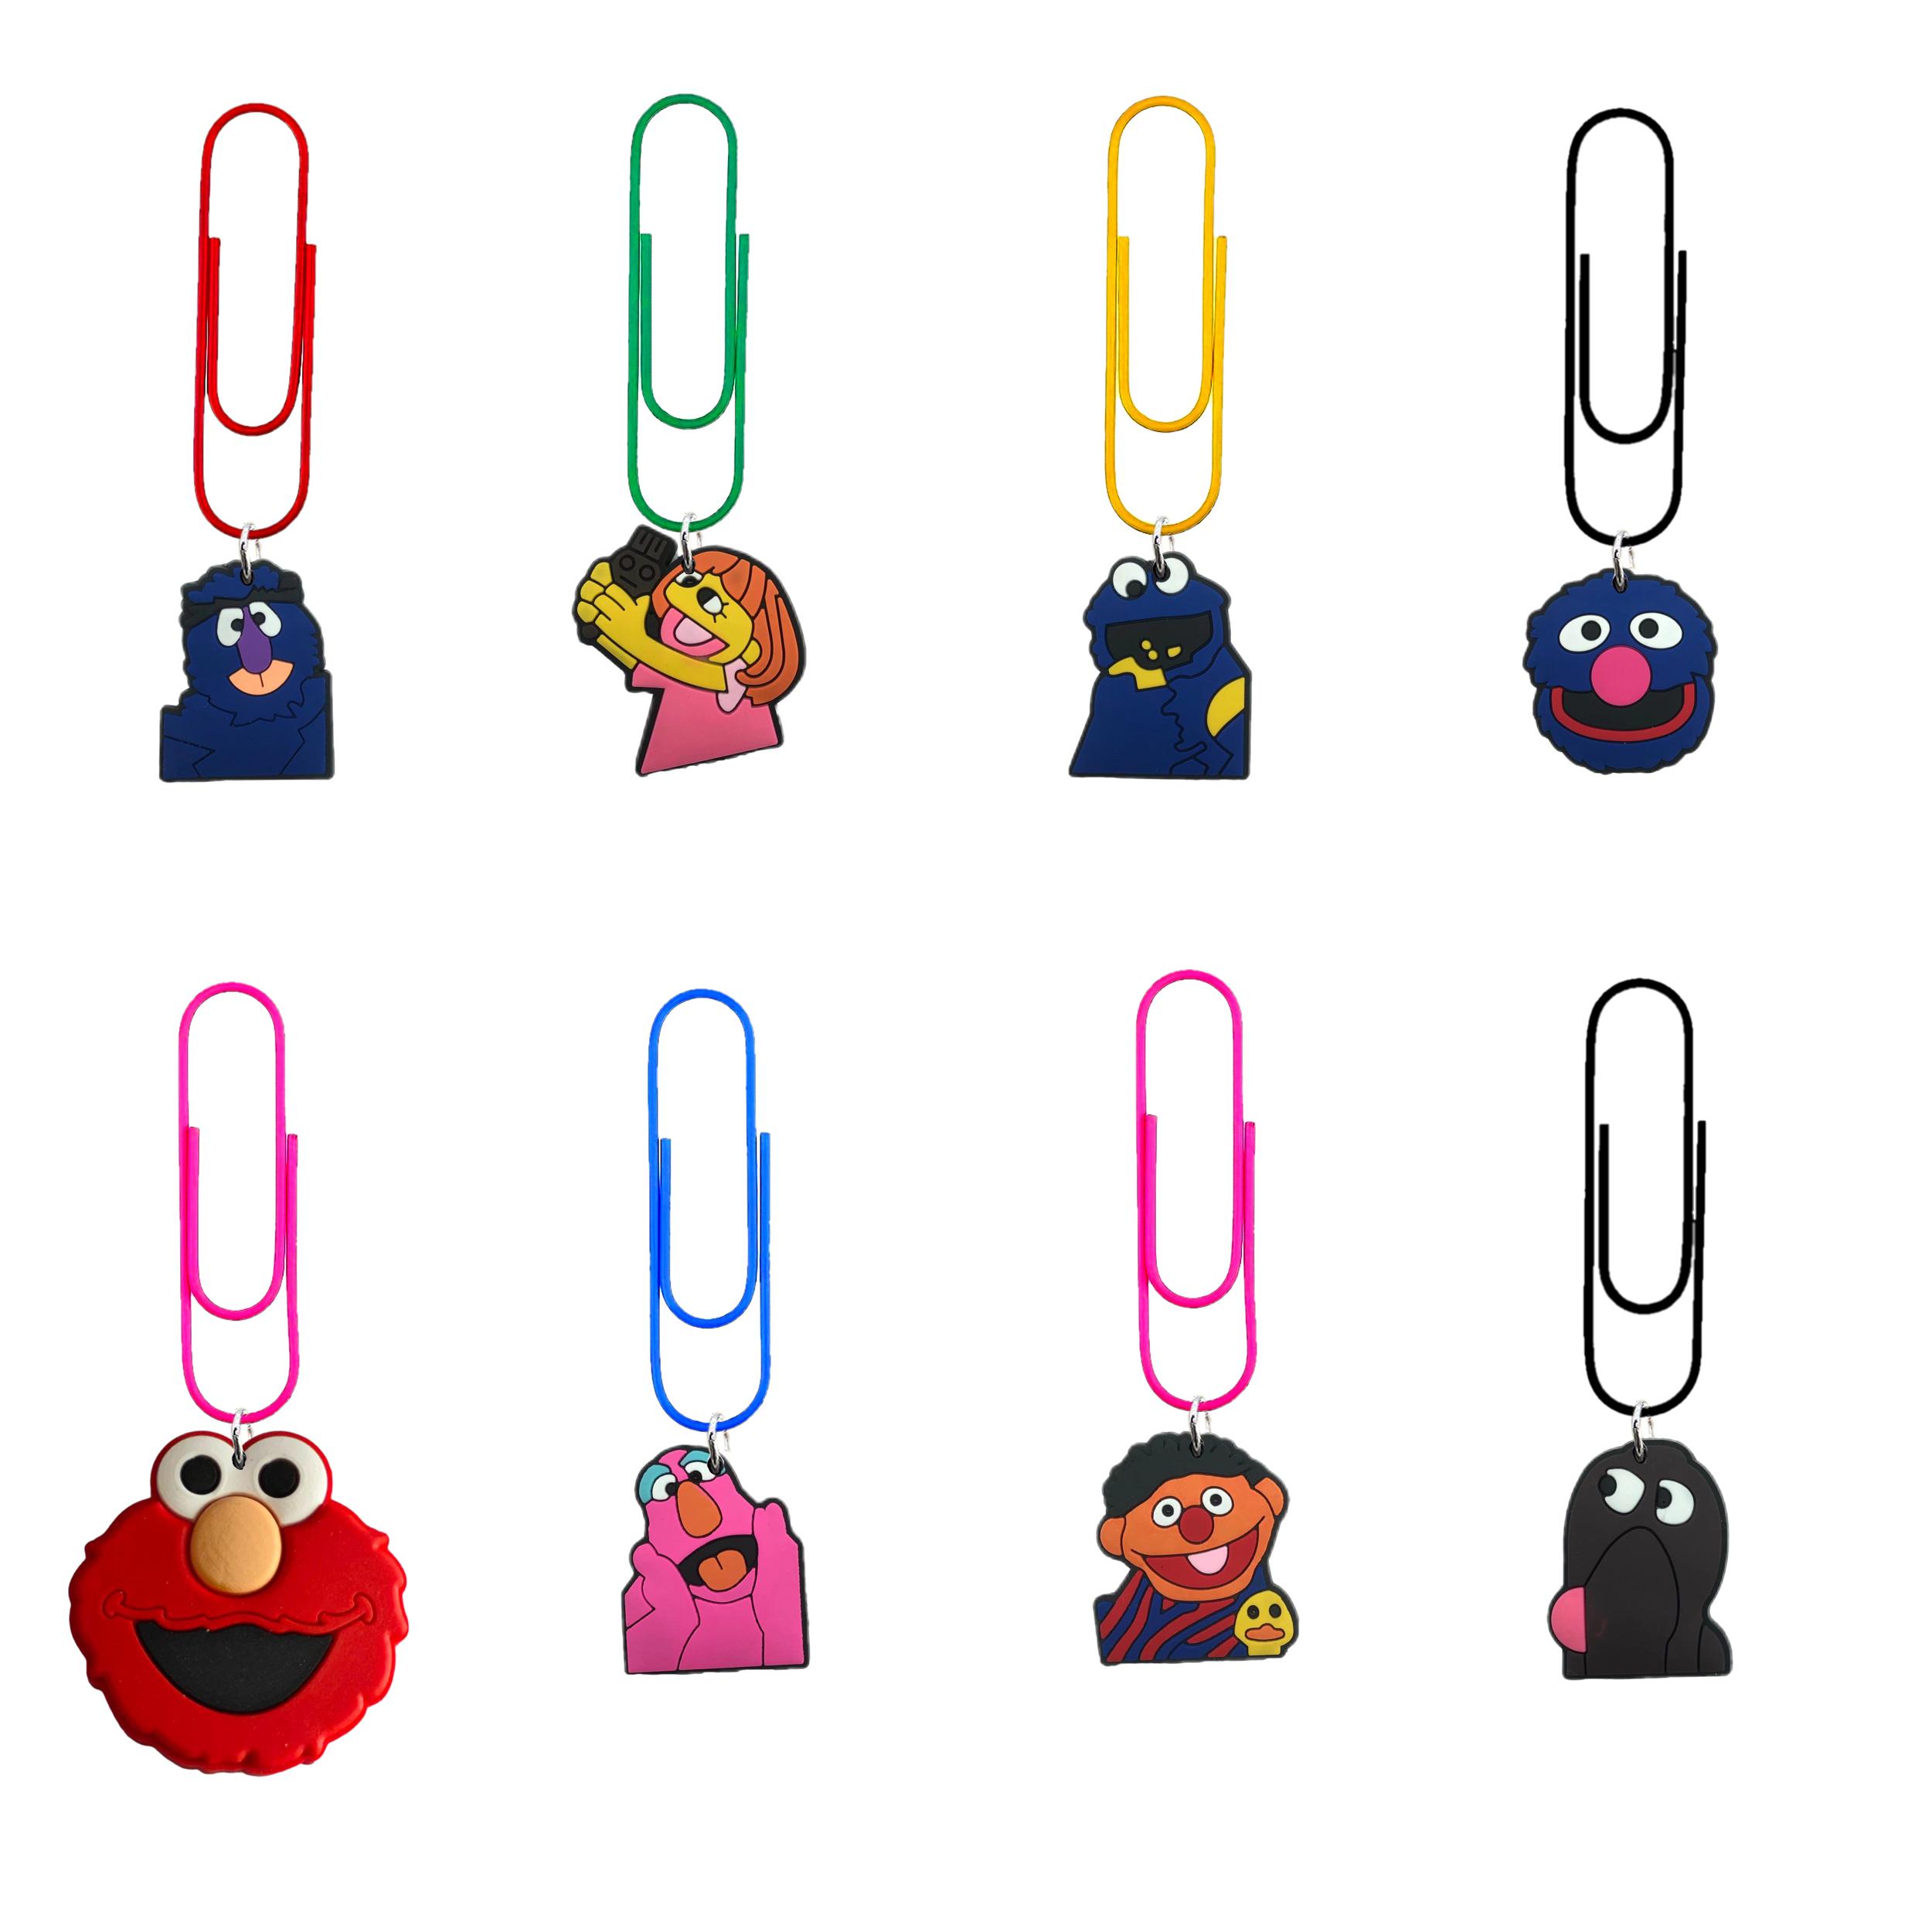 Hängen Sesame Street Cartoon Paper Clips Funny Bookmarks PaperClips Colorf Pagination Presents For Girls Cute Bookmark Office Supplies Otoxi